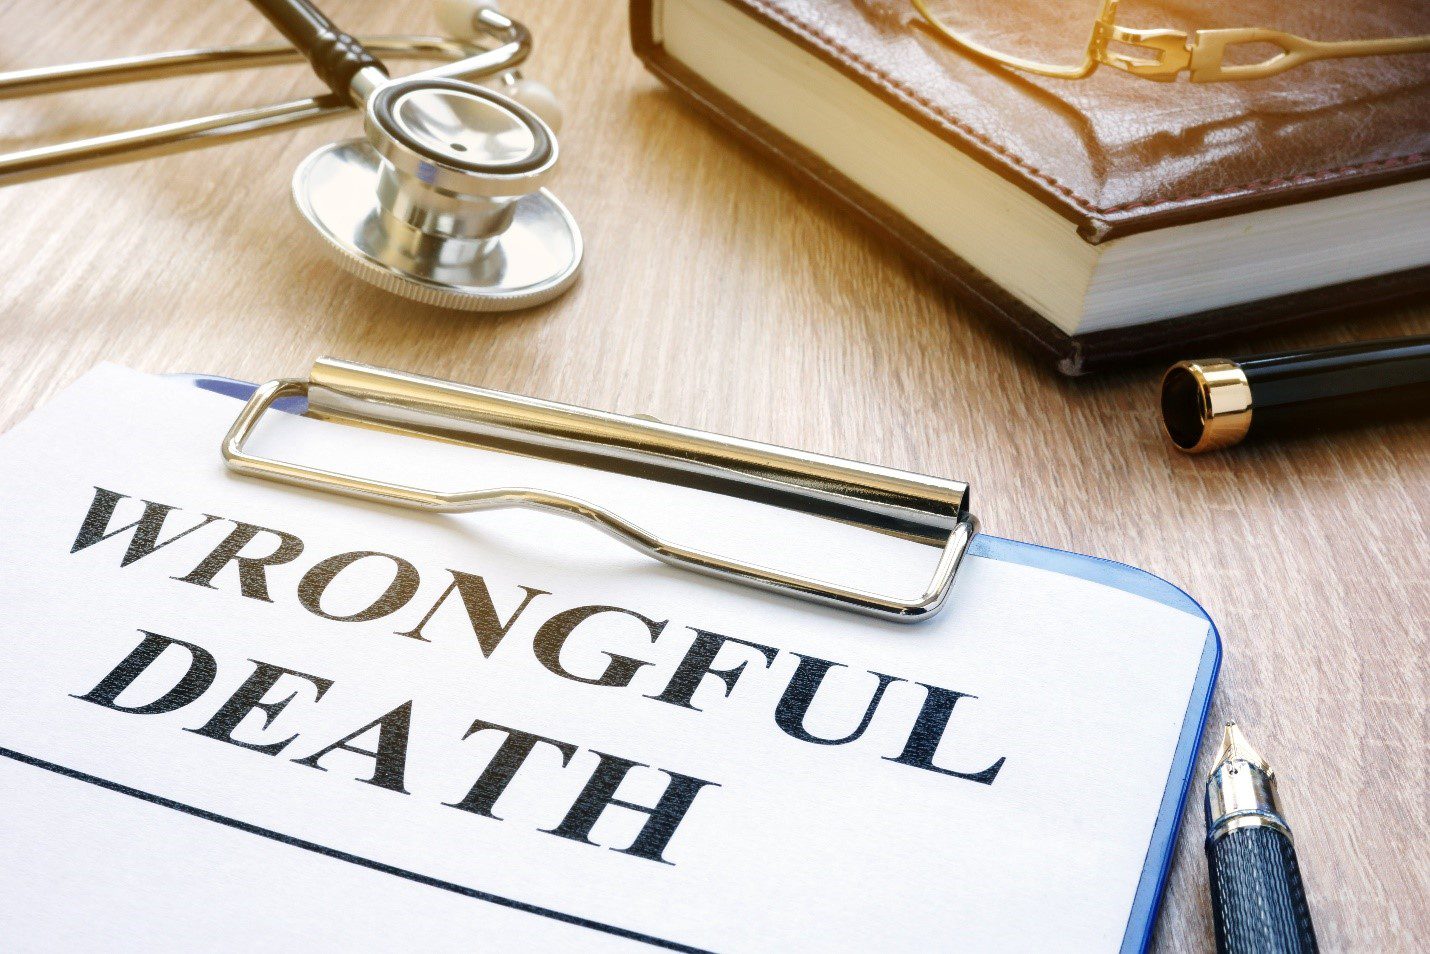 Wrongful death concept image with stethoscope and law book